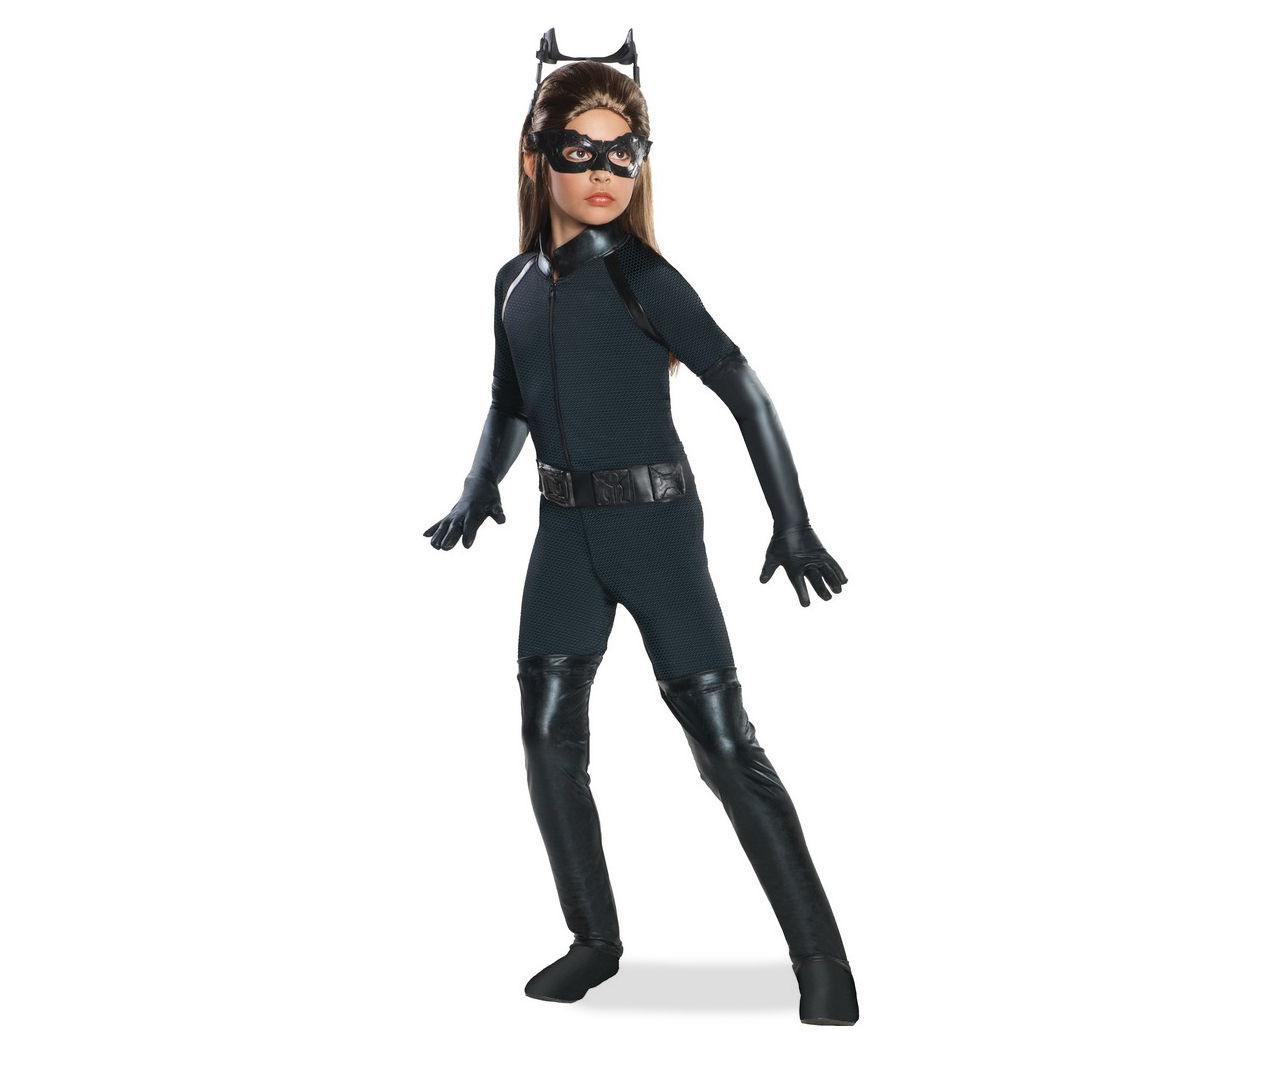 Kids Size L The Dark Knight Rises Deluxe Catwoman Costume